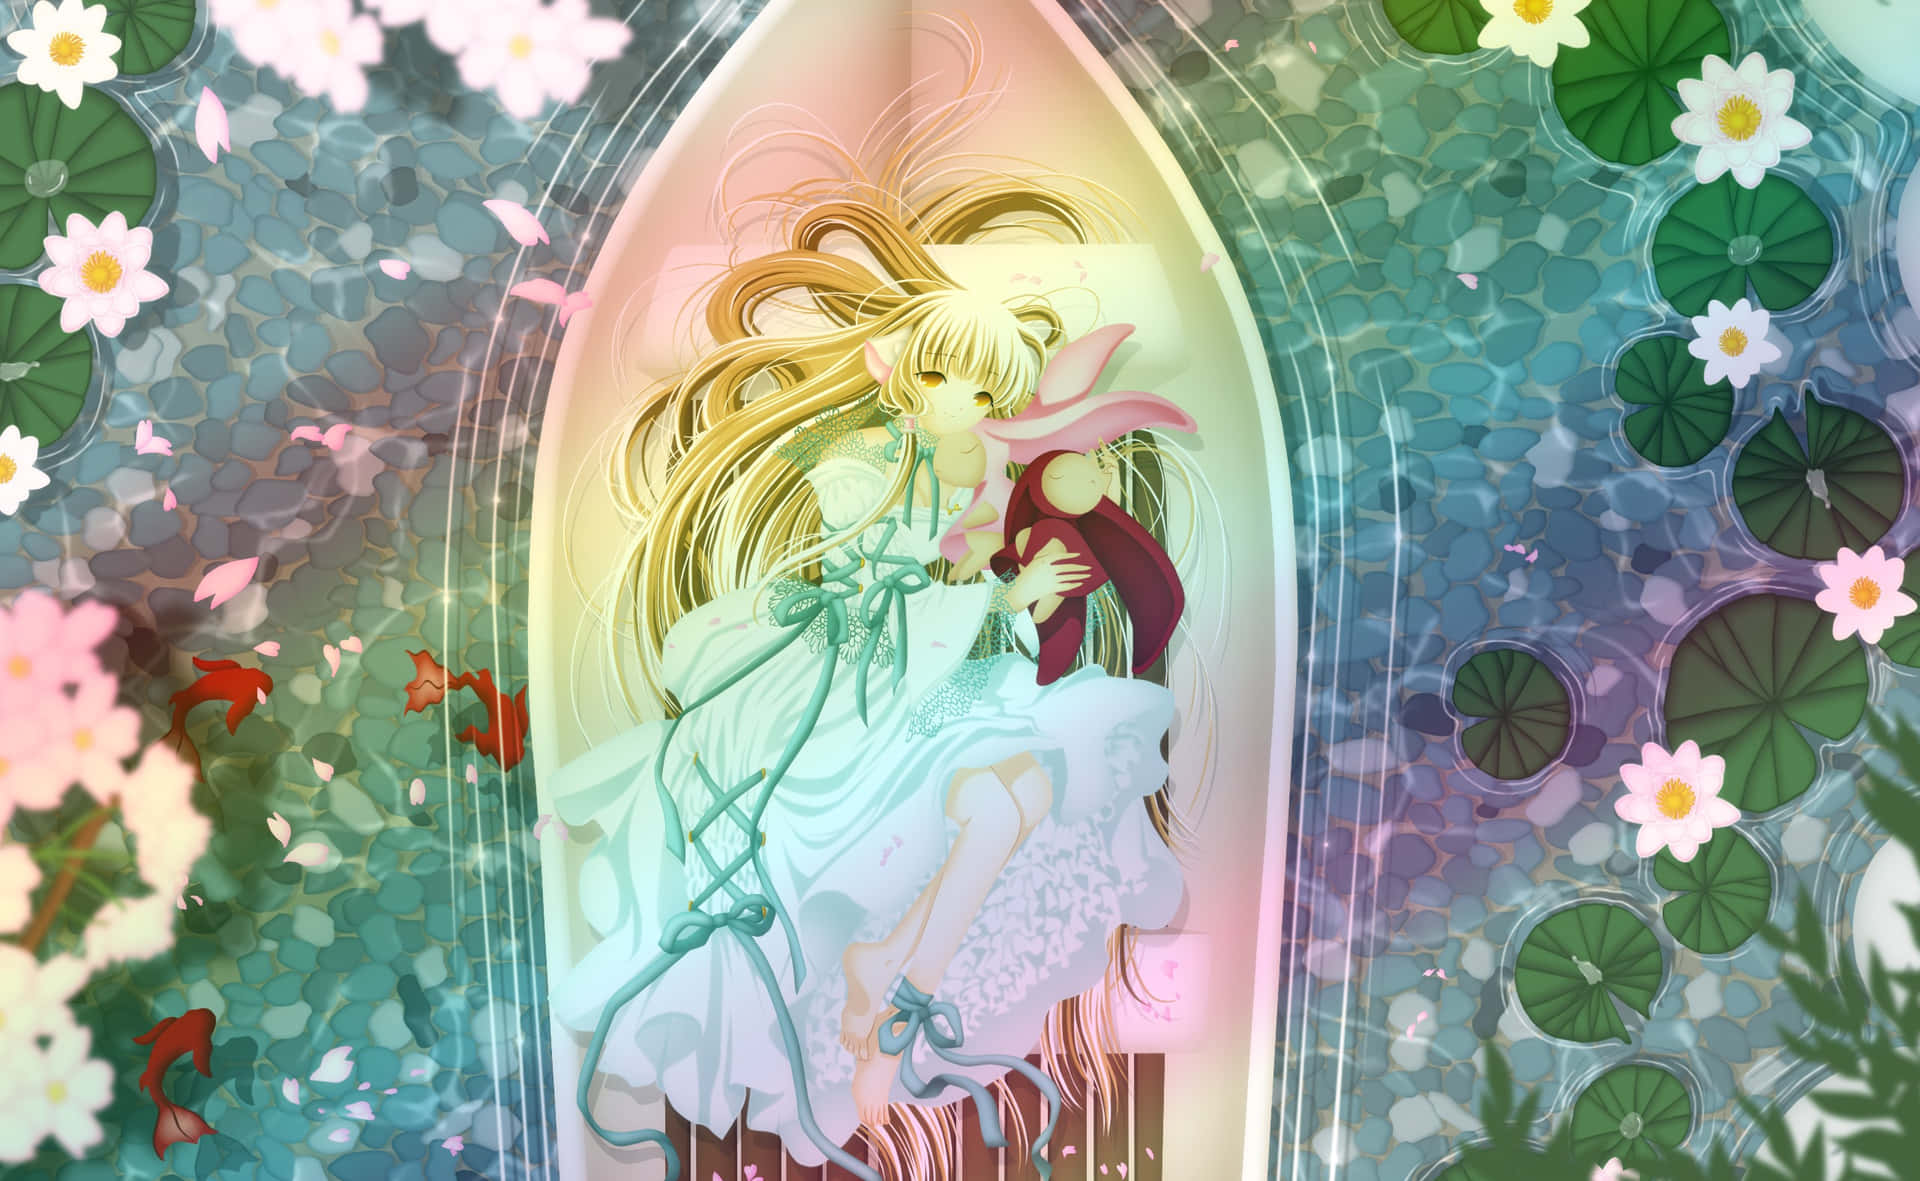 Caption: Chii From Chobits Anime Series In A Serene Pose Wallpaper